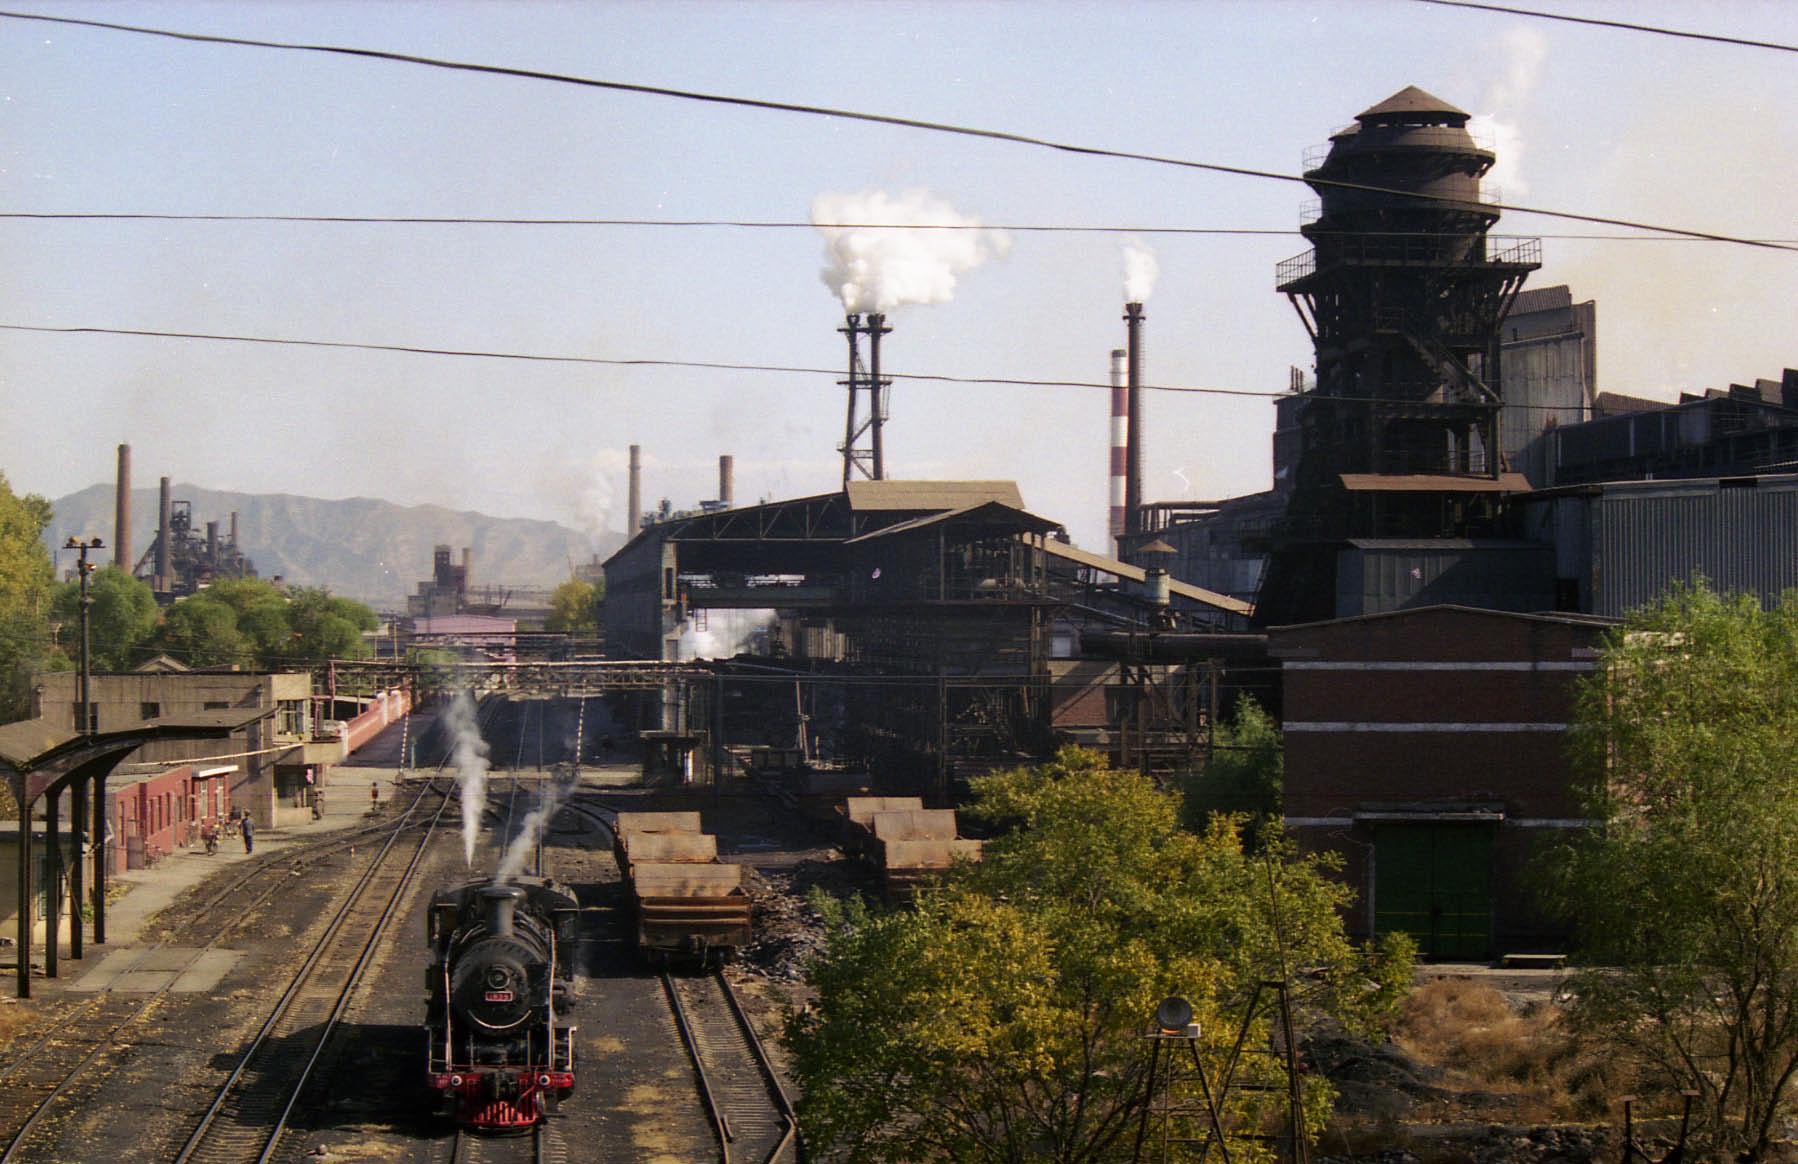 SY at Chengde Steelworks